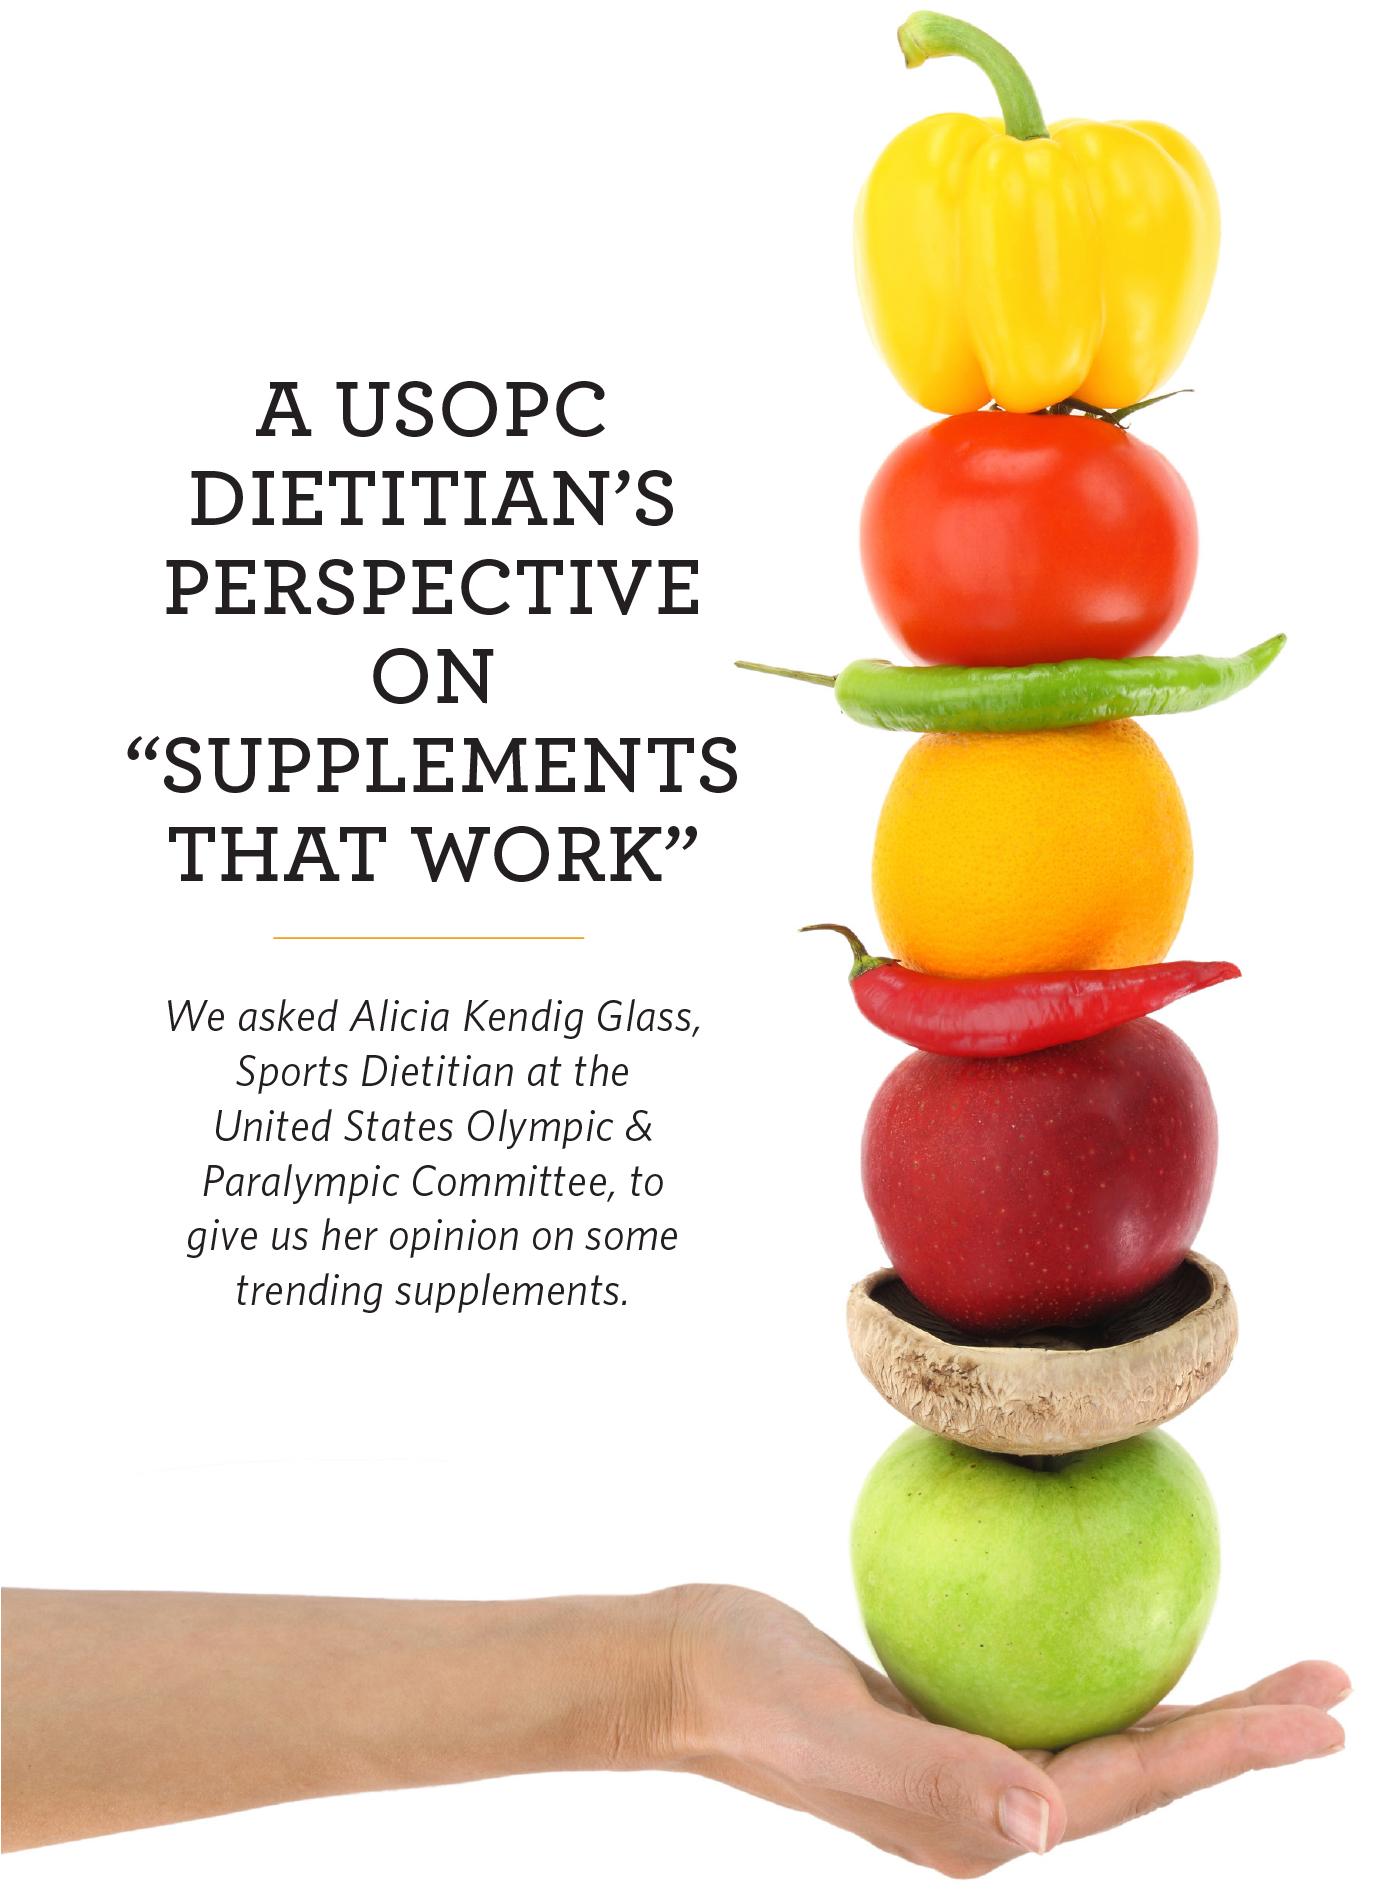 A USOPC Dietitian's perspective on supplements that work.